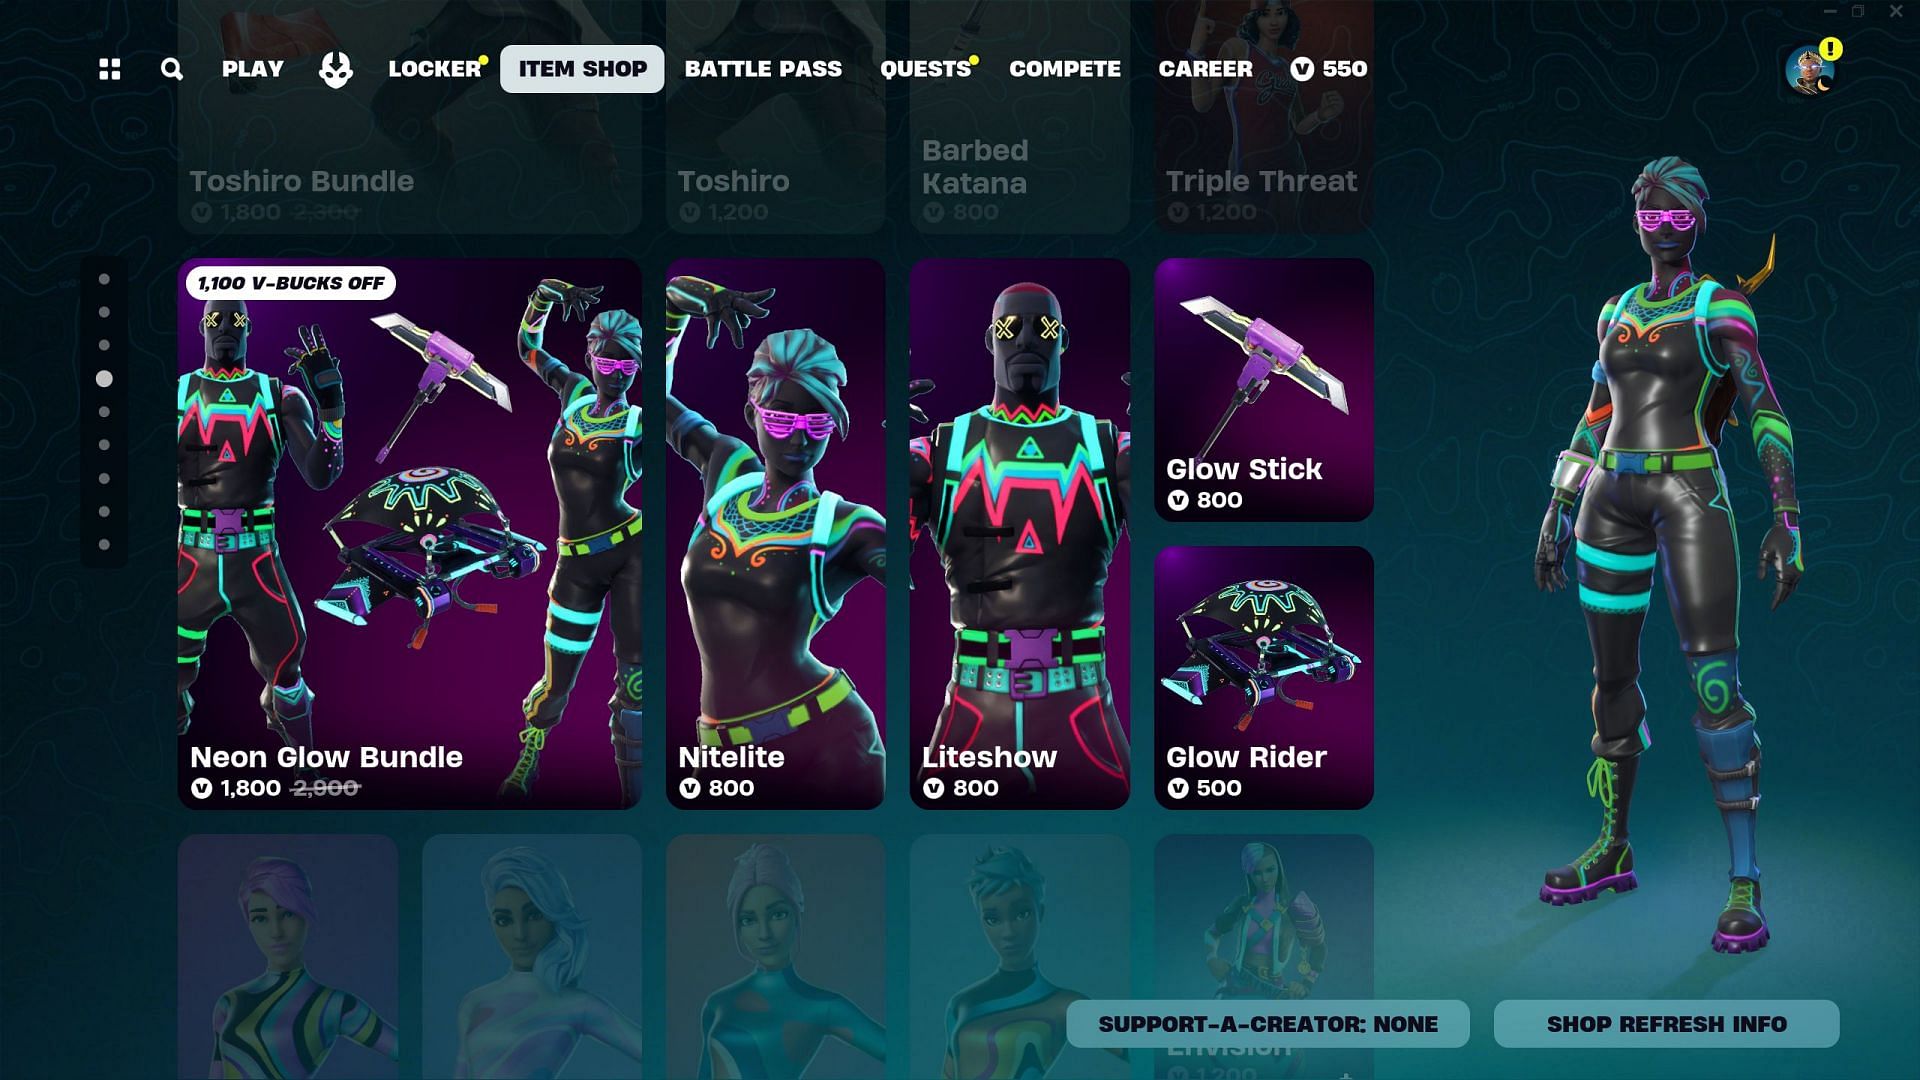 Nitelite and Liteshow skins are currently listed in the Item Shop (Image via Epic Games/Fortnite)